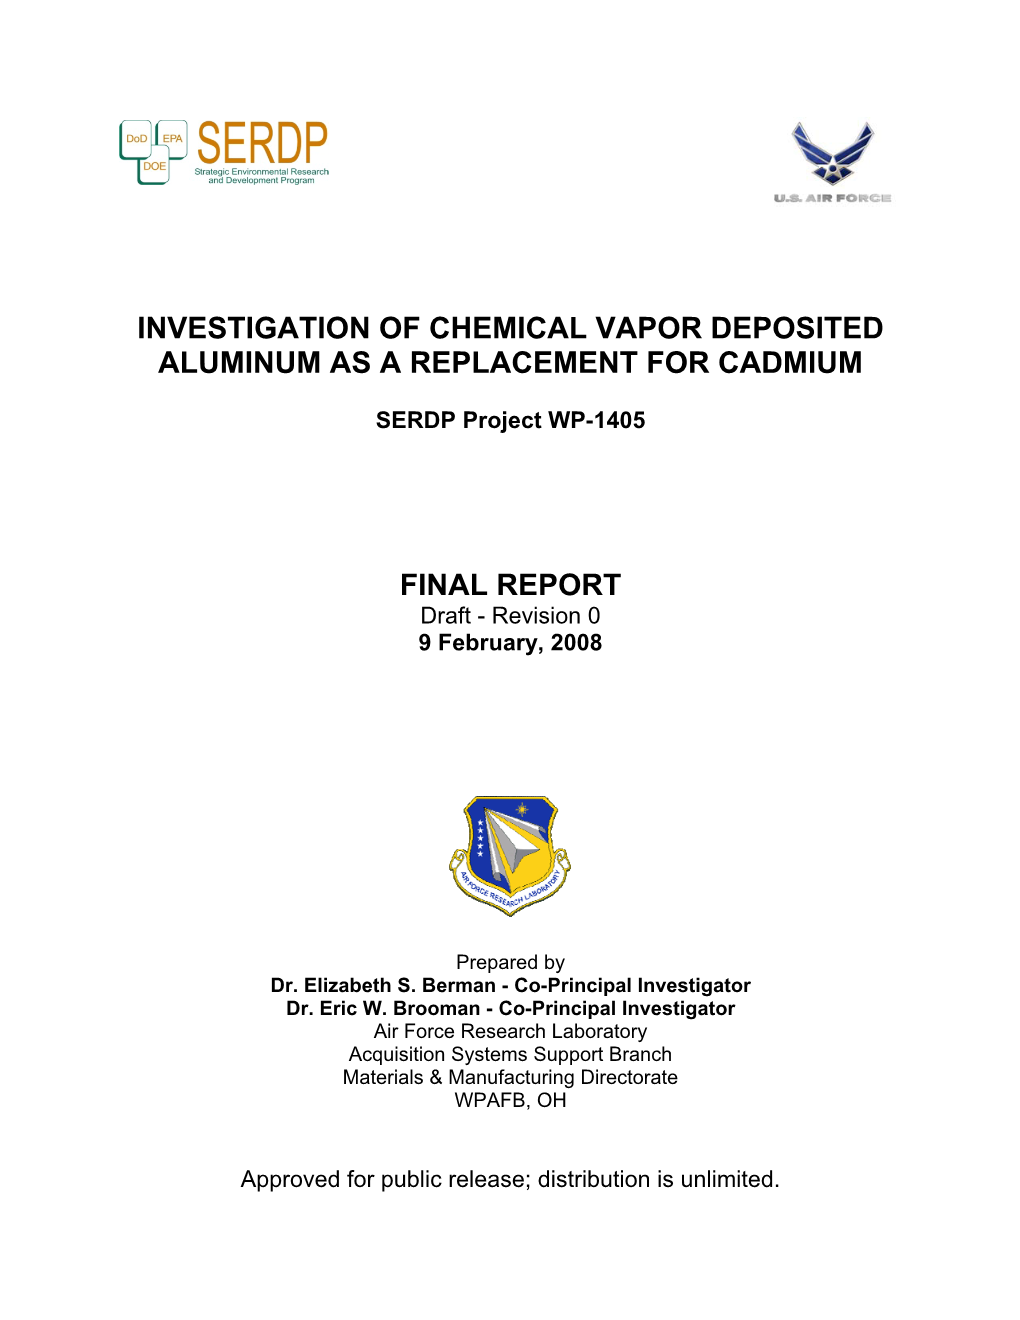 Investigation of Chemical Vapor Deposited Aluminum As a Replacement for Cadmium